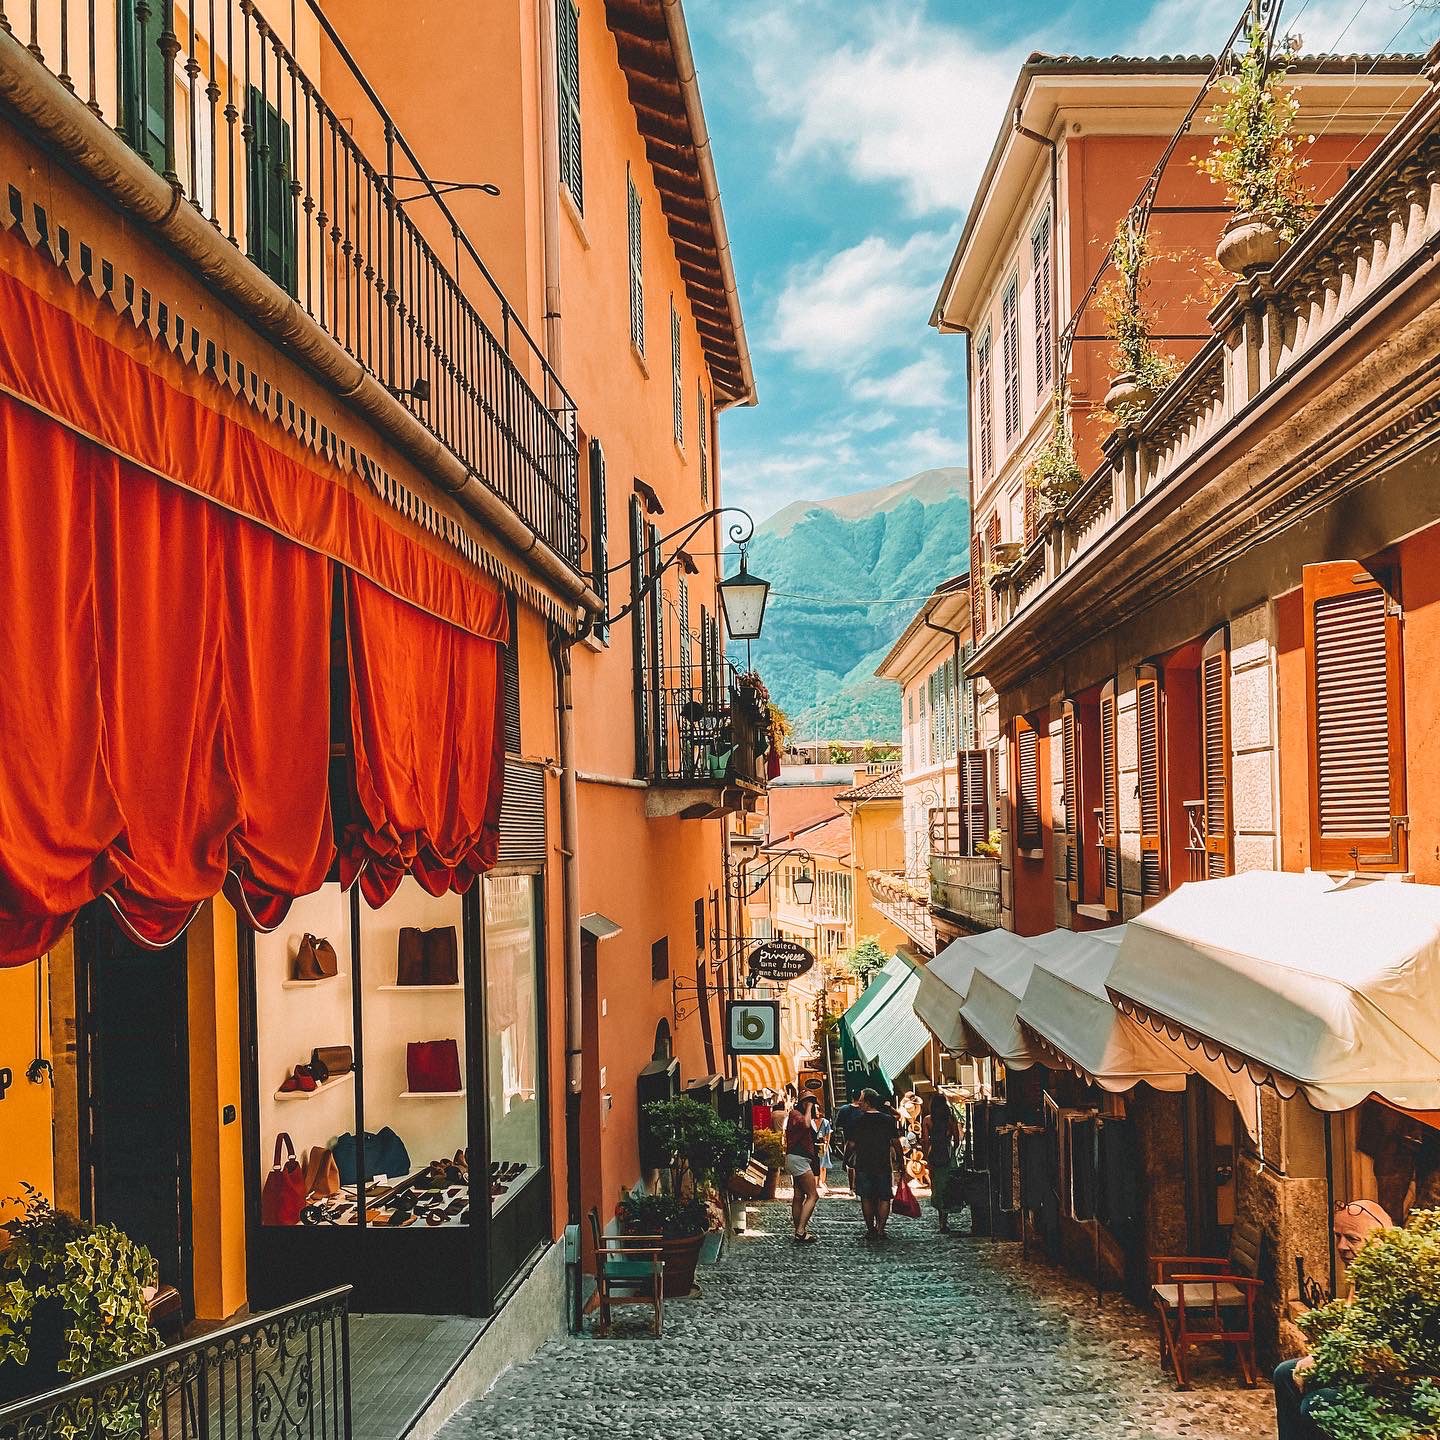 An Italian cobbled street lined with terracotta buildings with shutters and shop awnings.